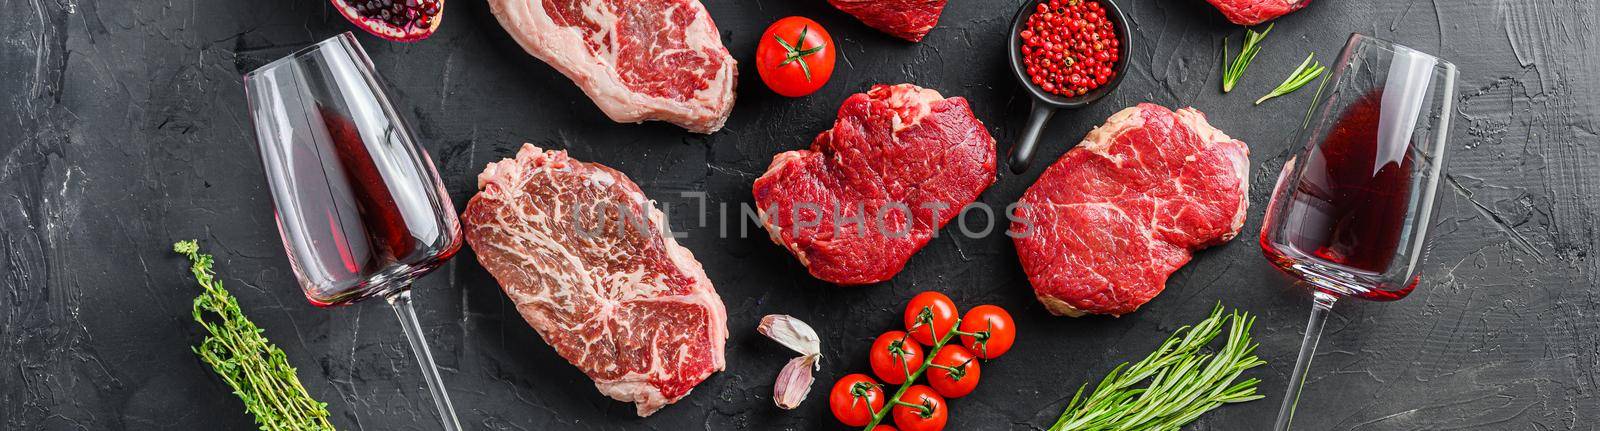 Set of various classic, alternative raw meatsteaks with glasses of red wine over black background top view. Big banner size